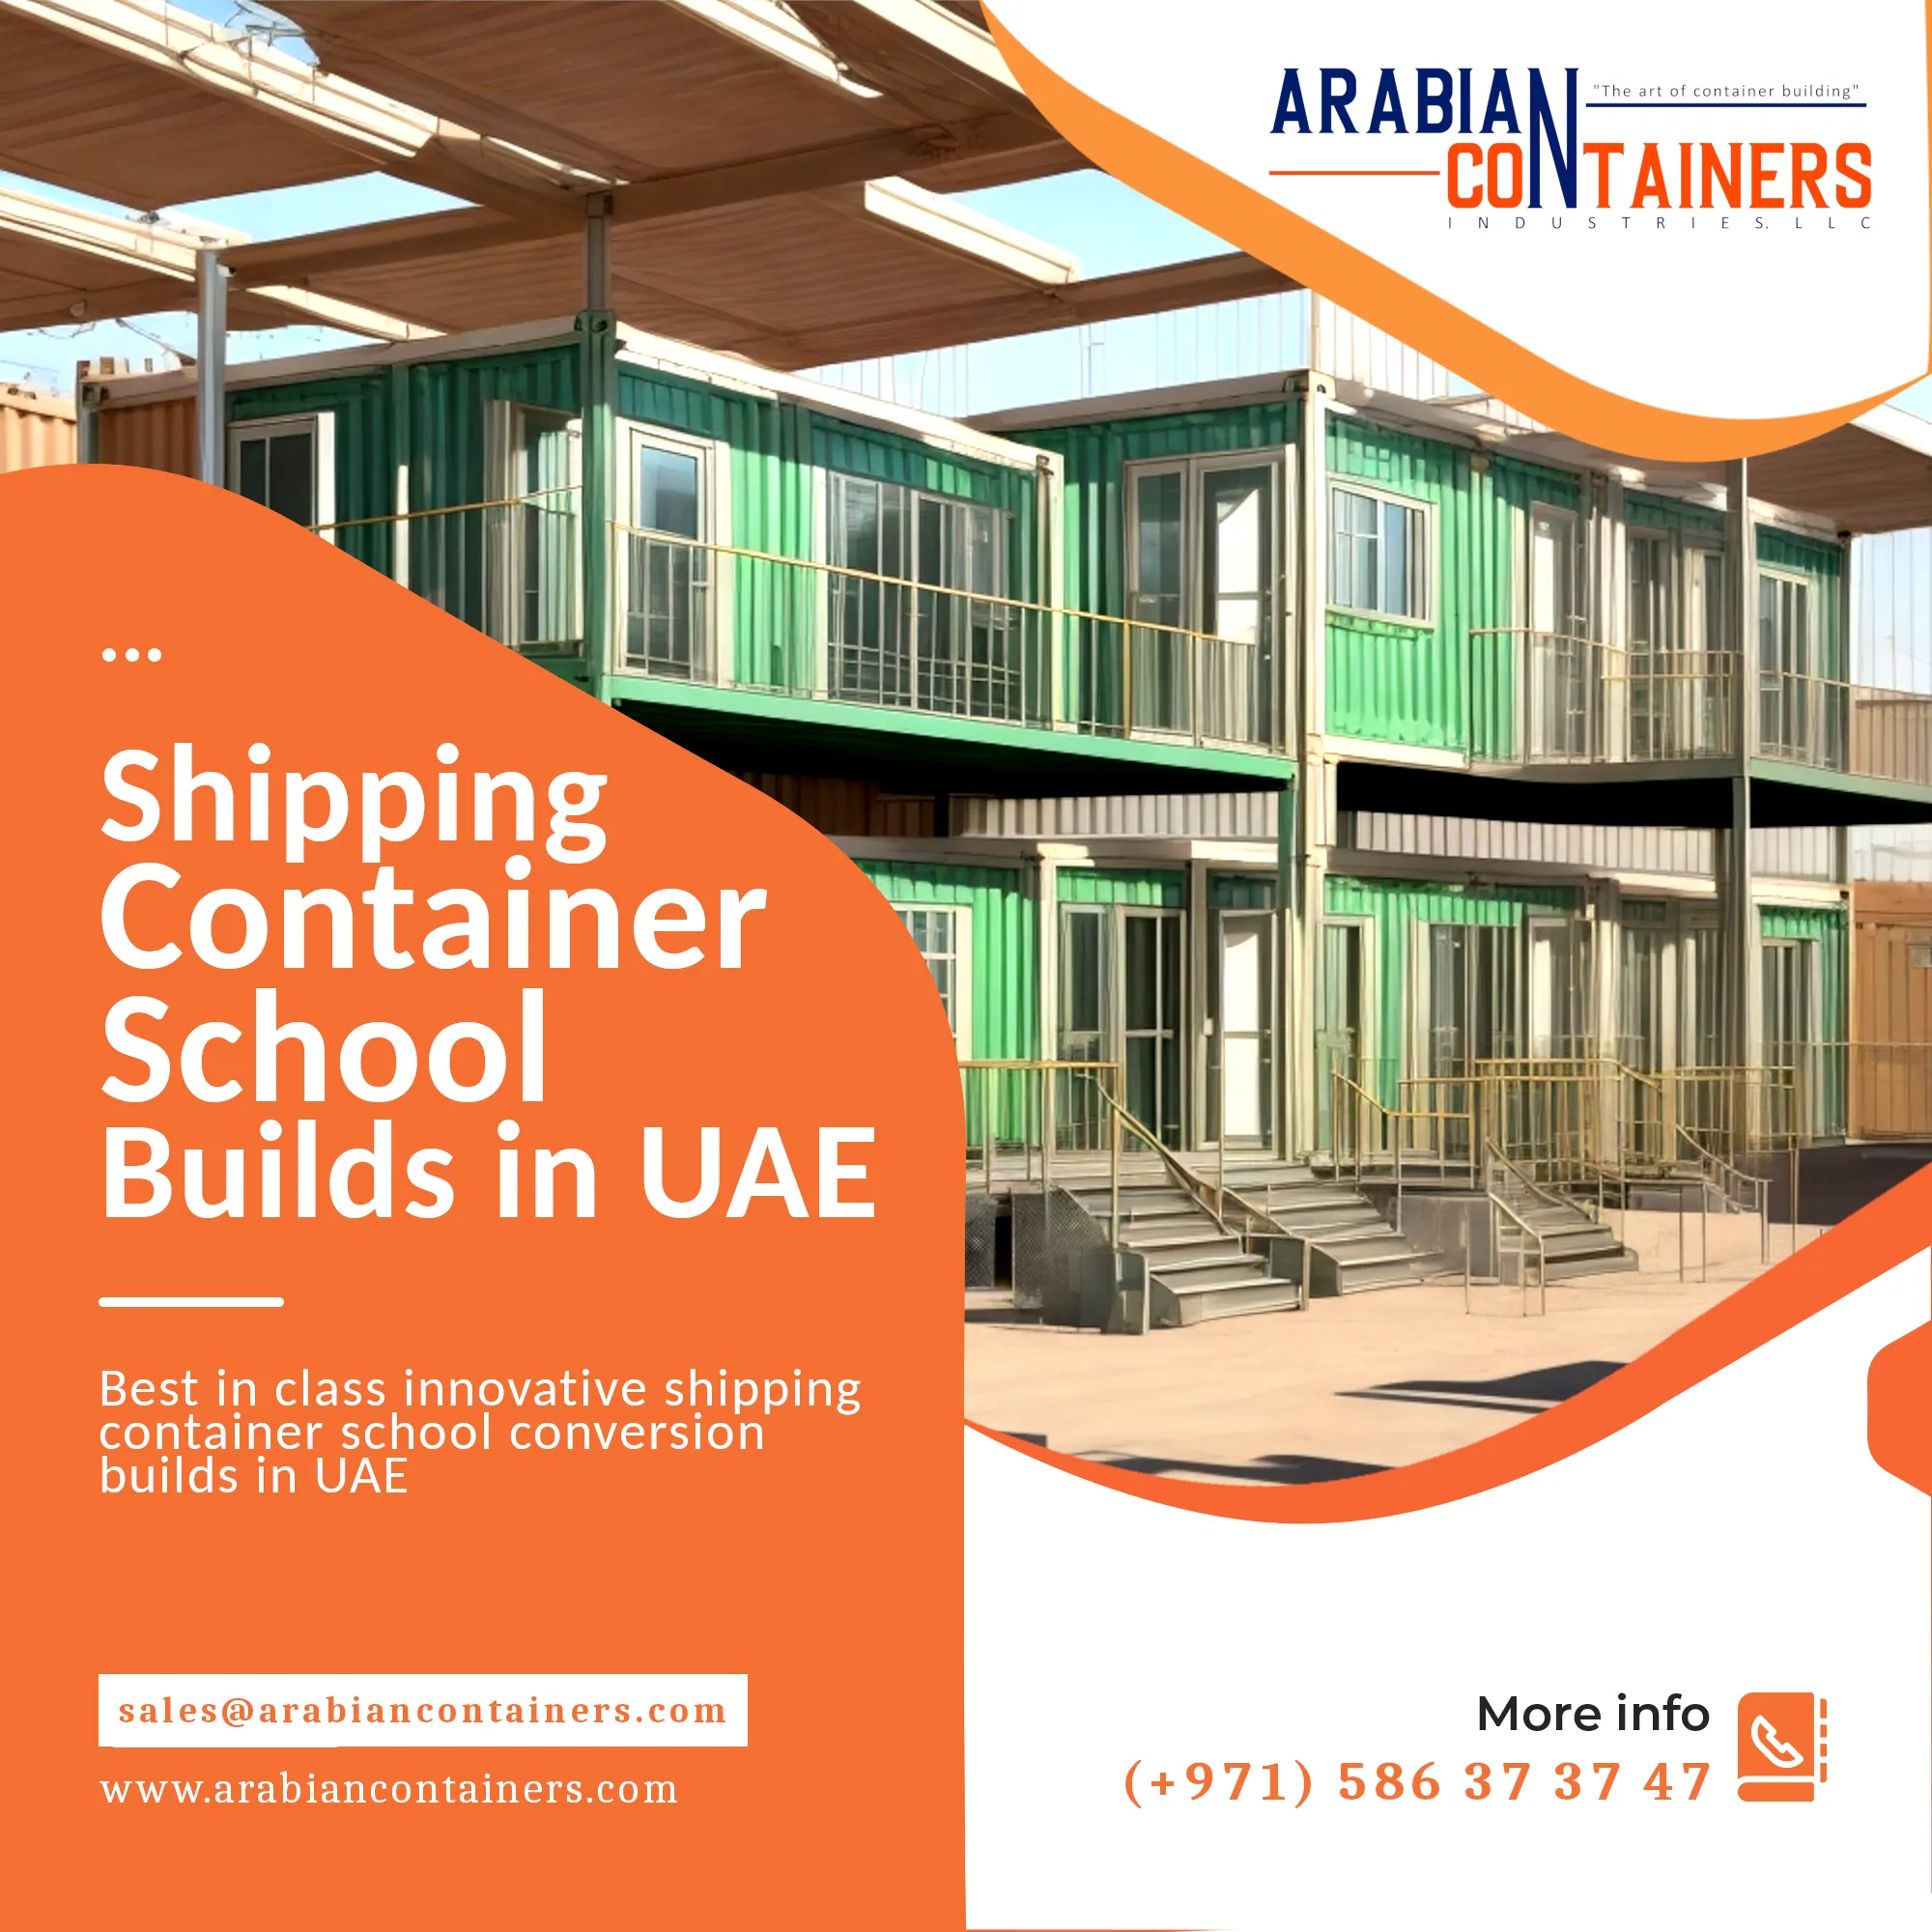 Shipping Container School Buildings in UAE